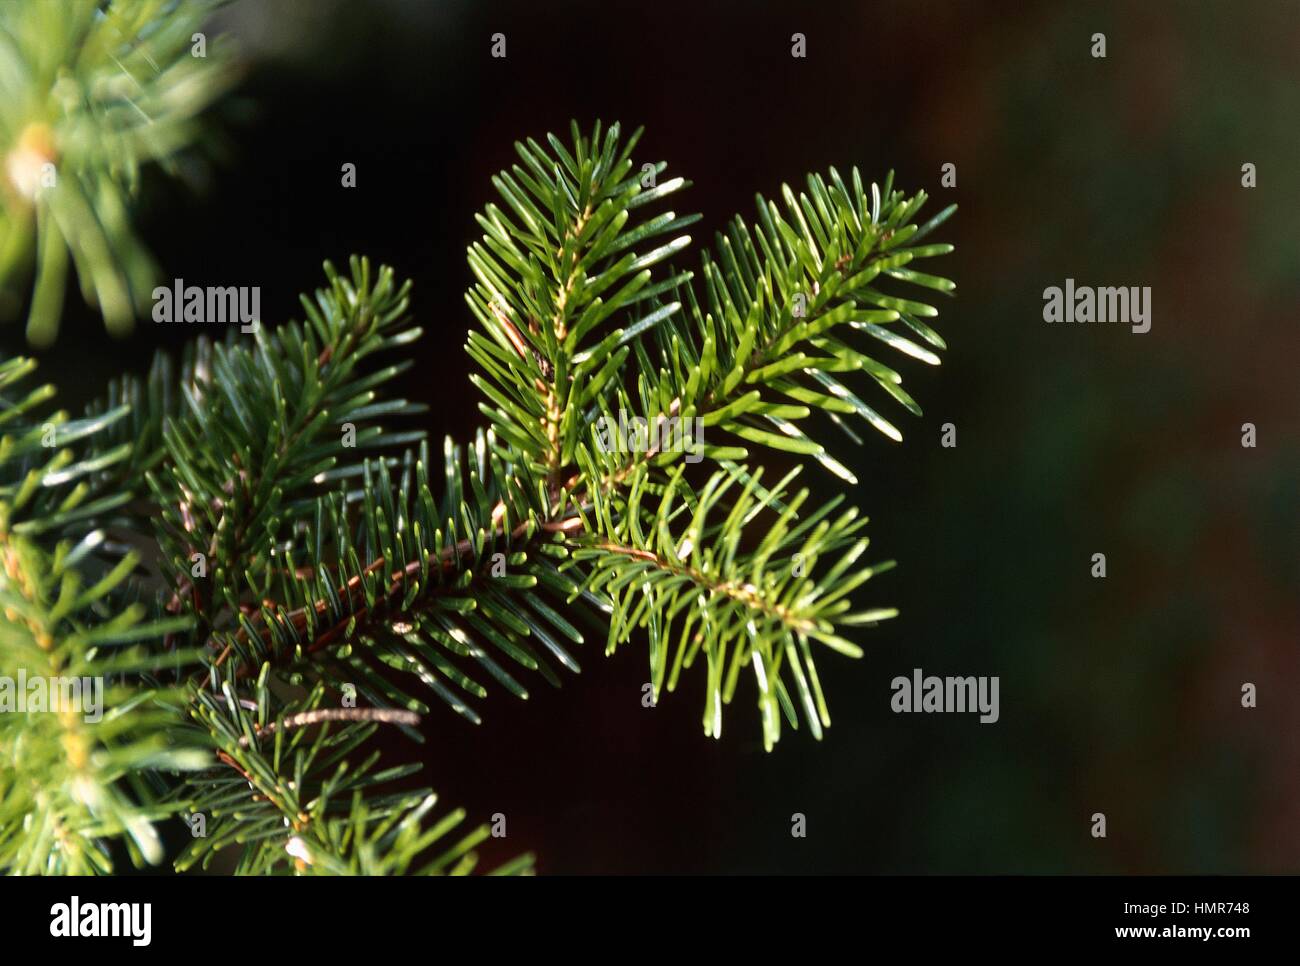 Greek Fir leaves (Abies cephalonica), Pinaceae. Stock Photo